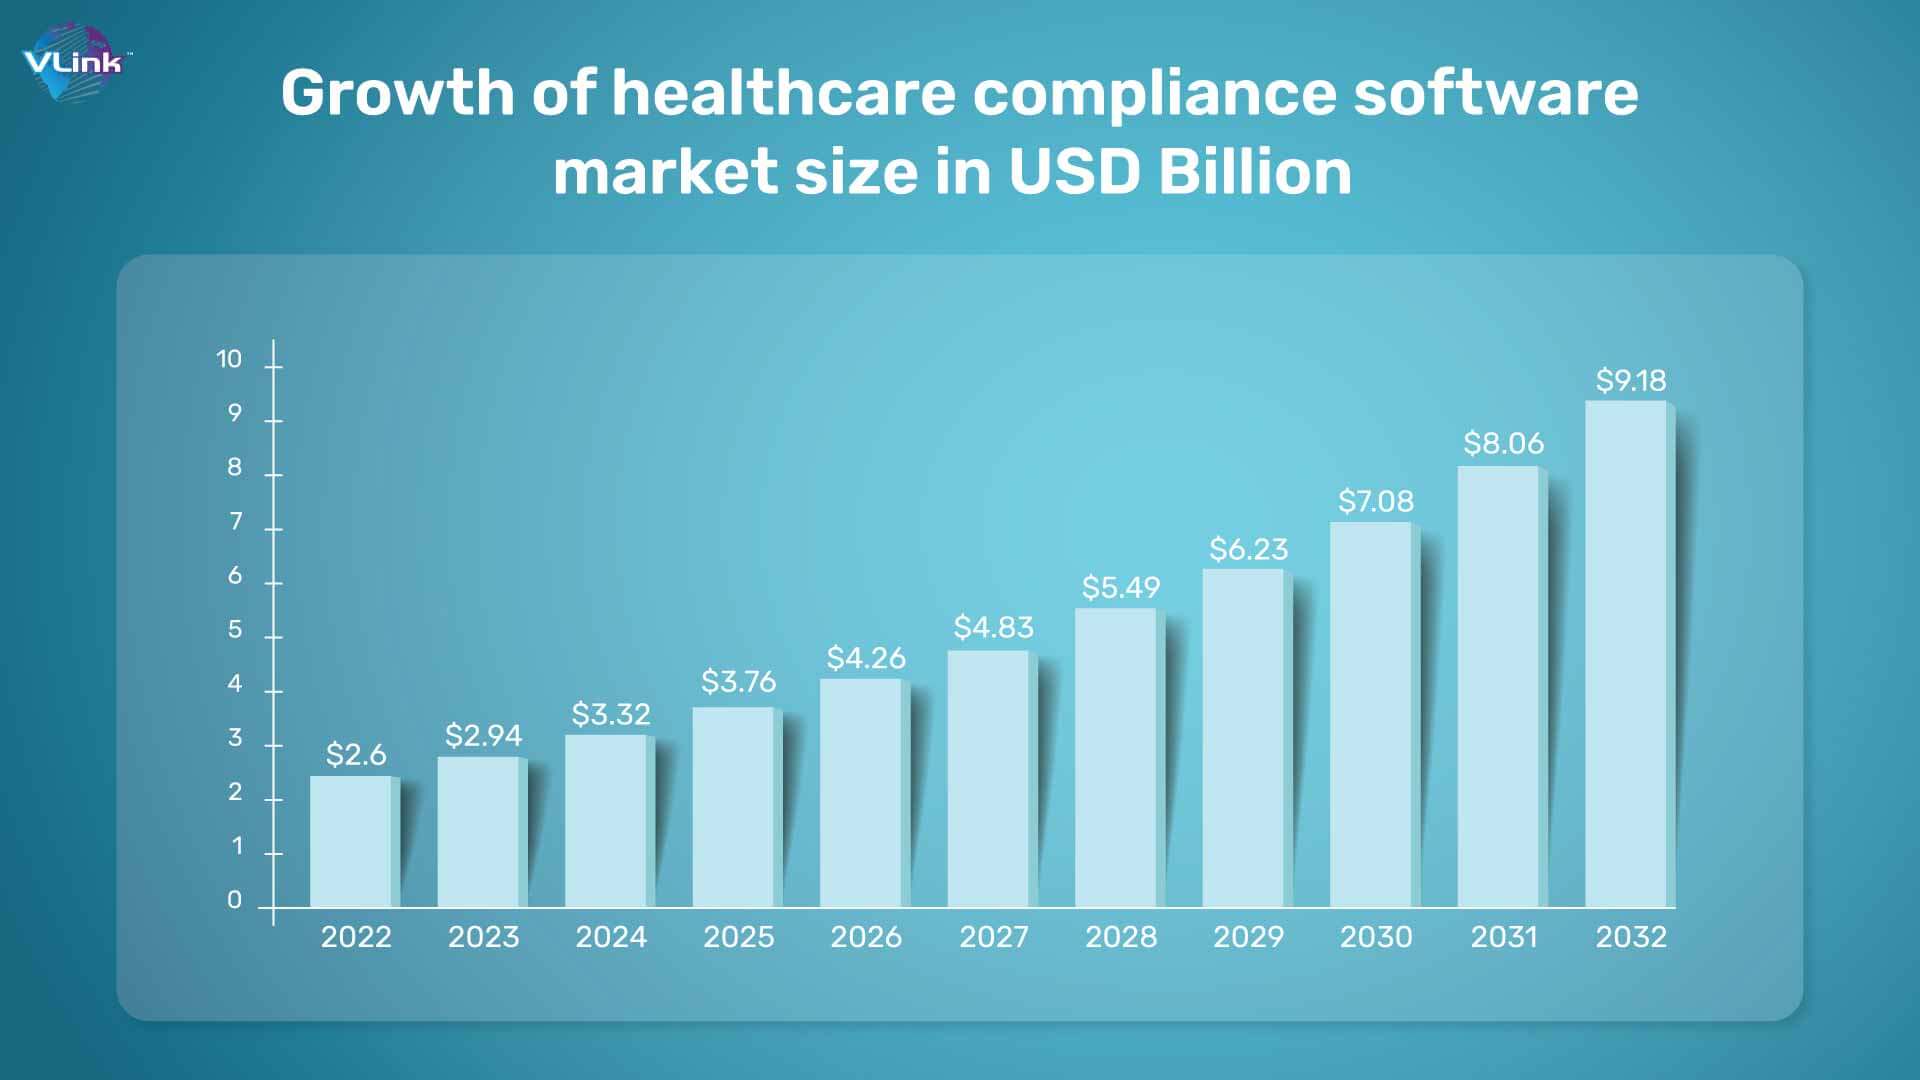 Growth of healthcare compliance software market size in USD Billion